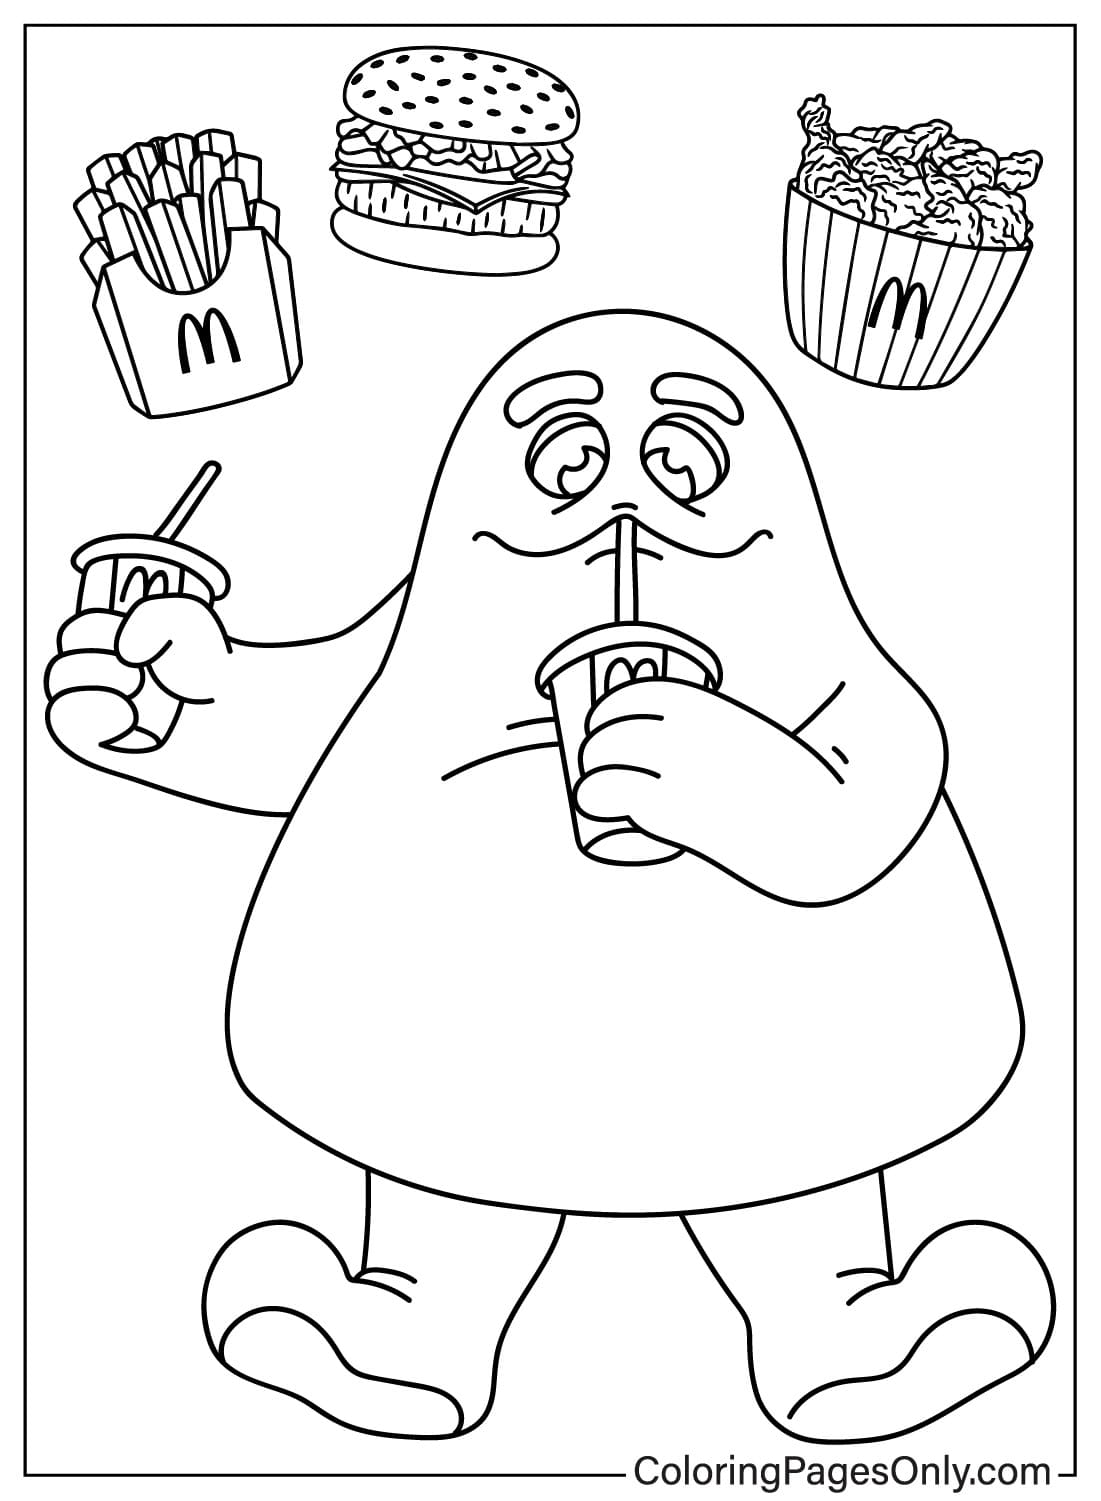 McDonalds Coloring Page Free - Free Printable Coloring Pages